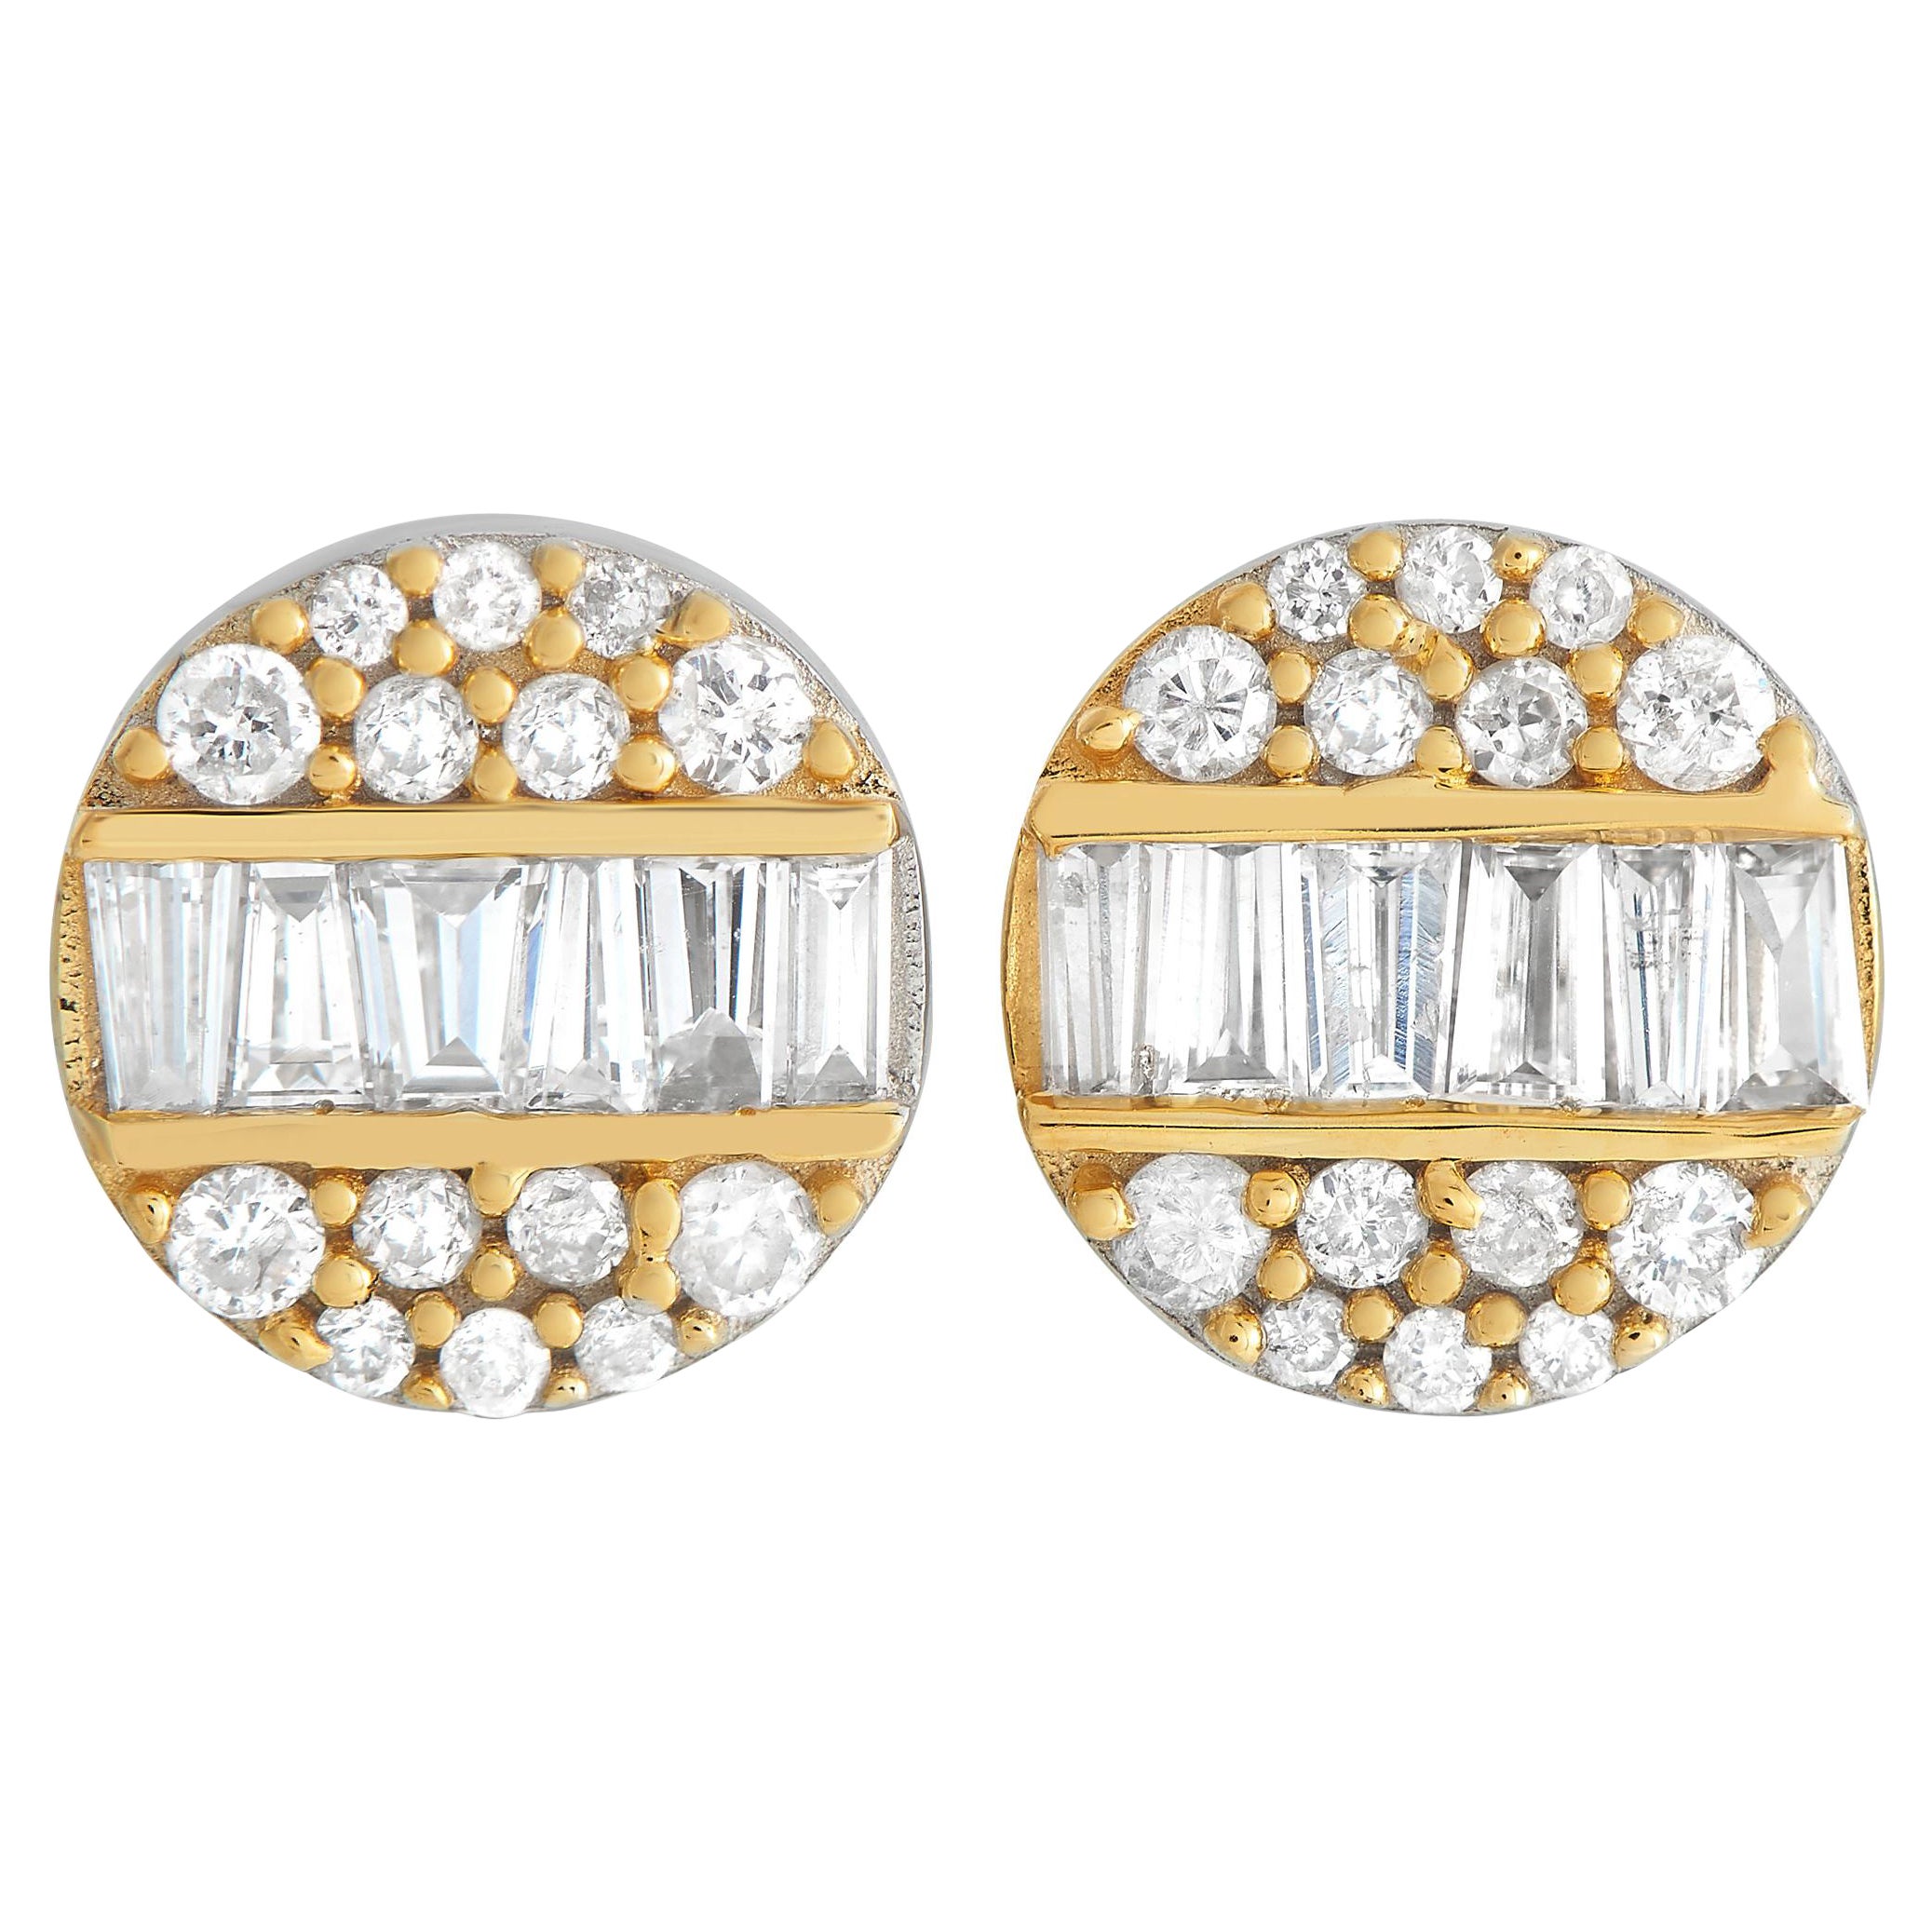 LB Exclusive 14K White and Yellow Gold 0.44ct Diamond Earrings